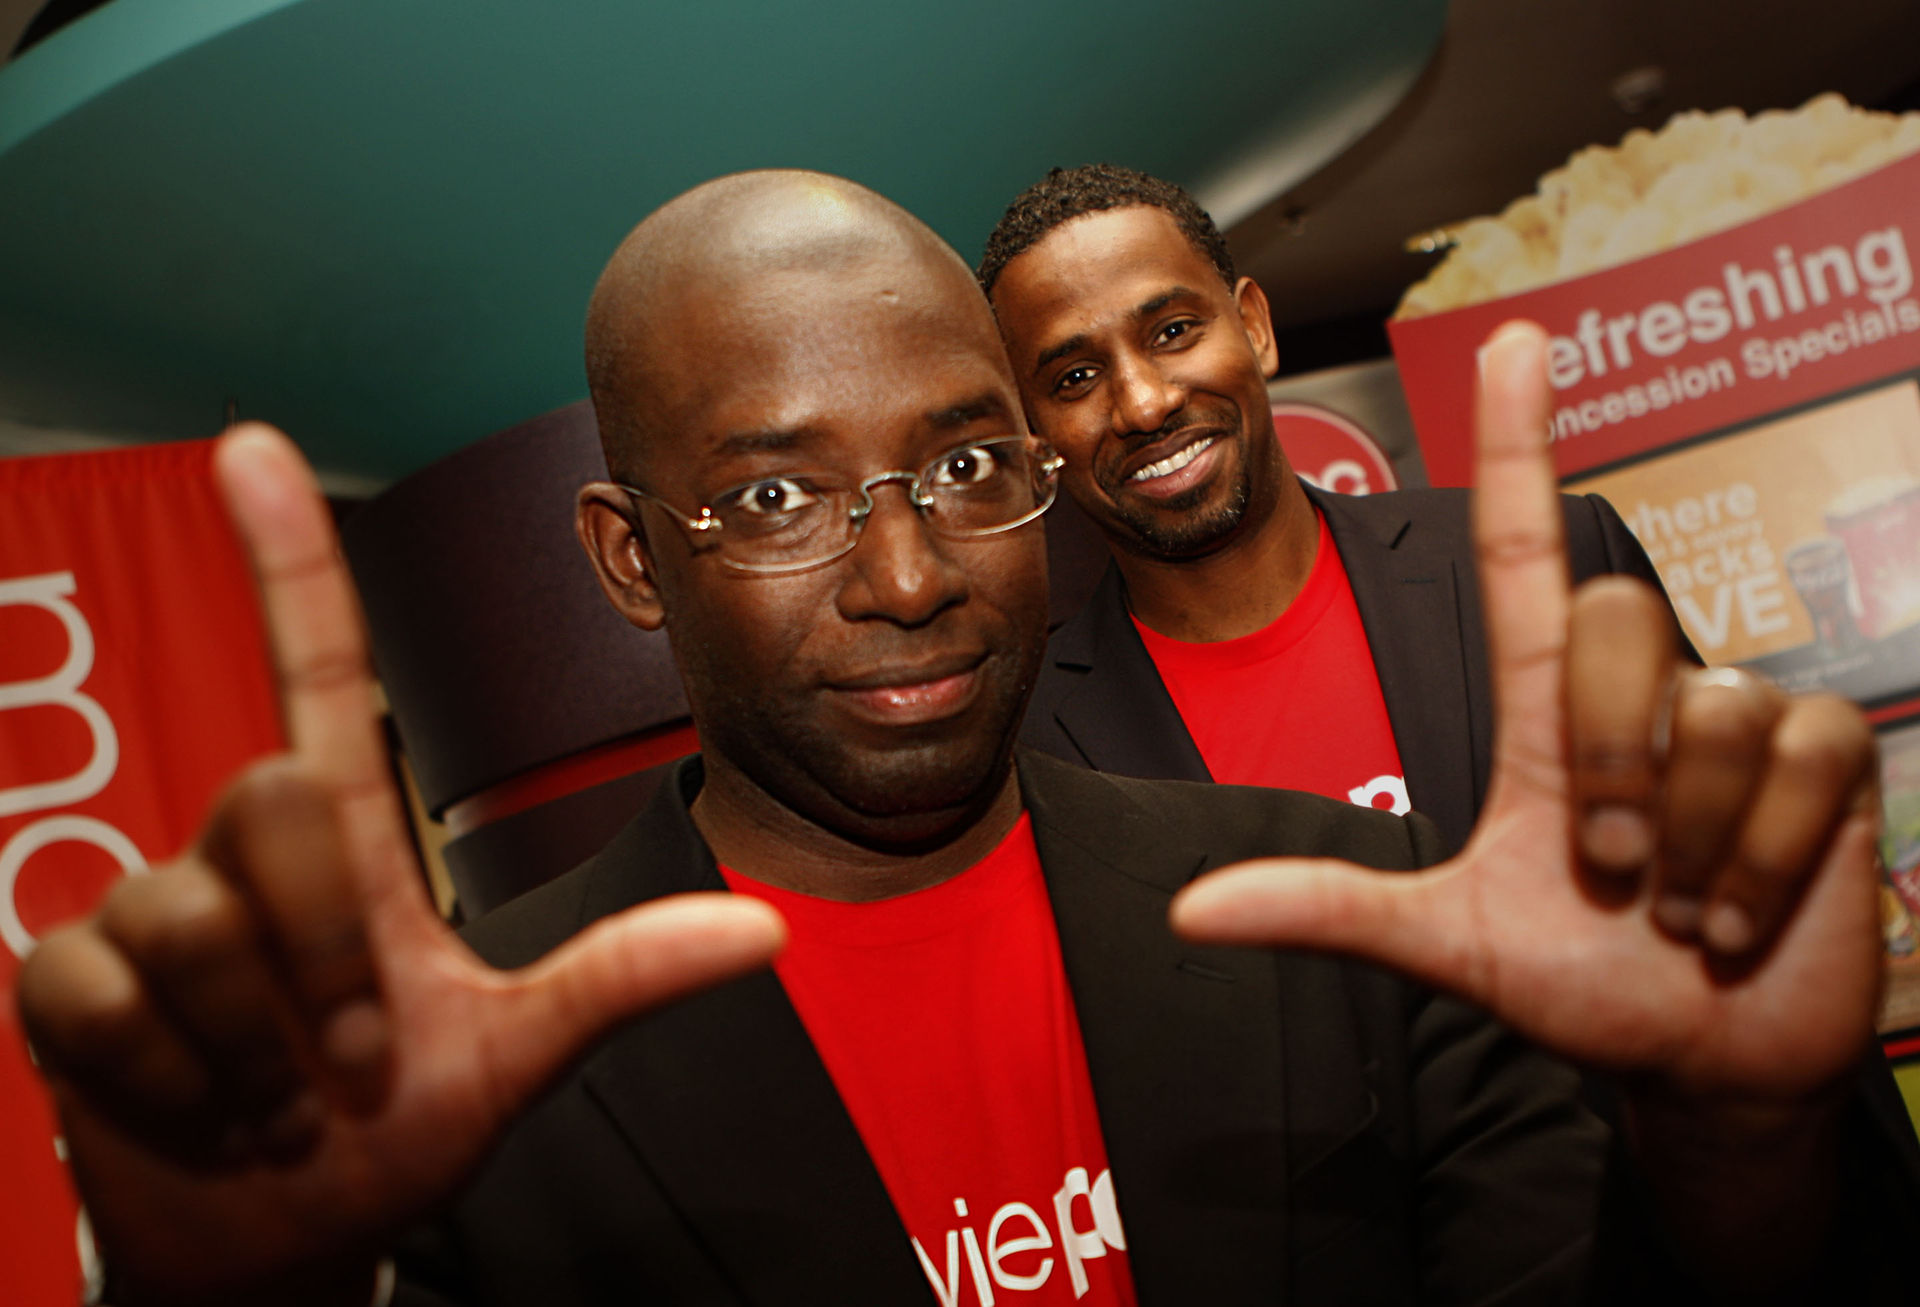 MoviePass co-founders Stacy Spikes (front) and Hamet Watt (back) at AMC in San Francisco, Calif., on Wednesday, January 29, 2011.